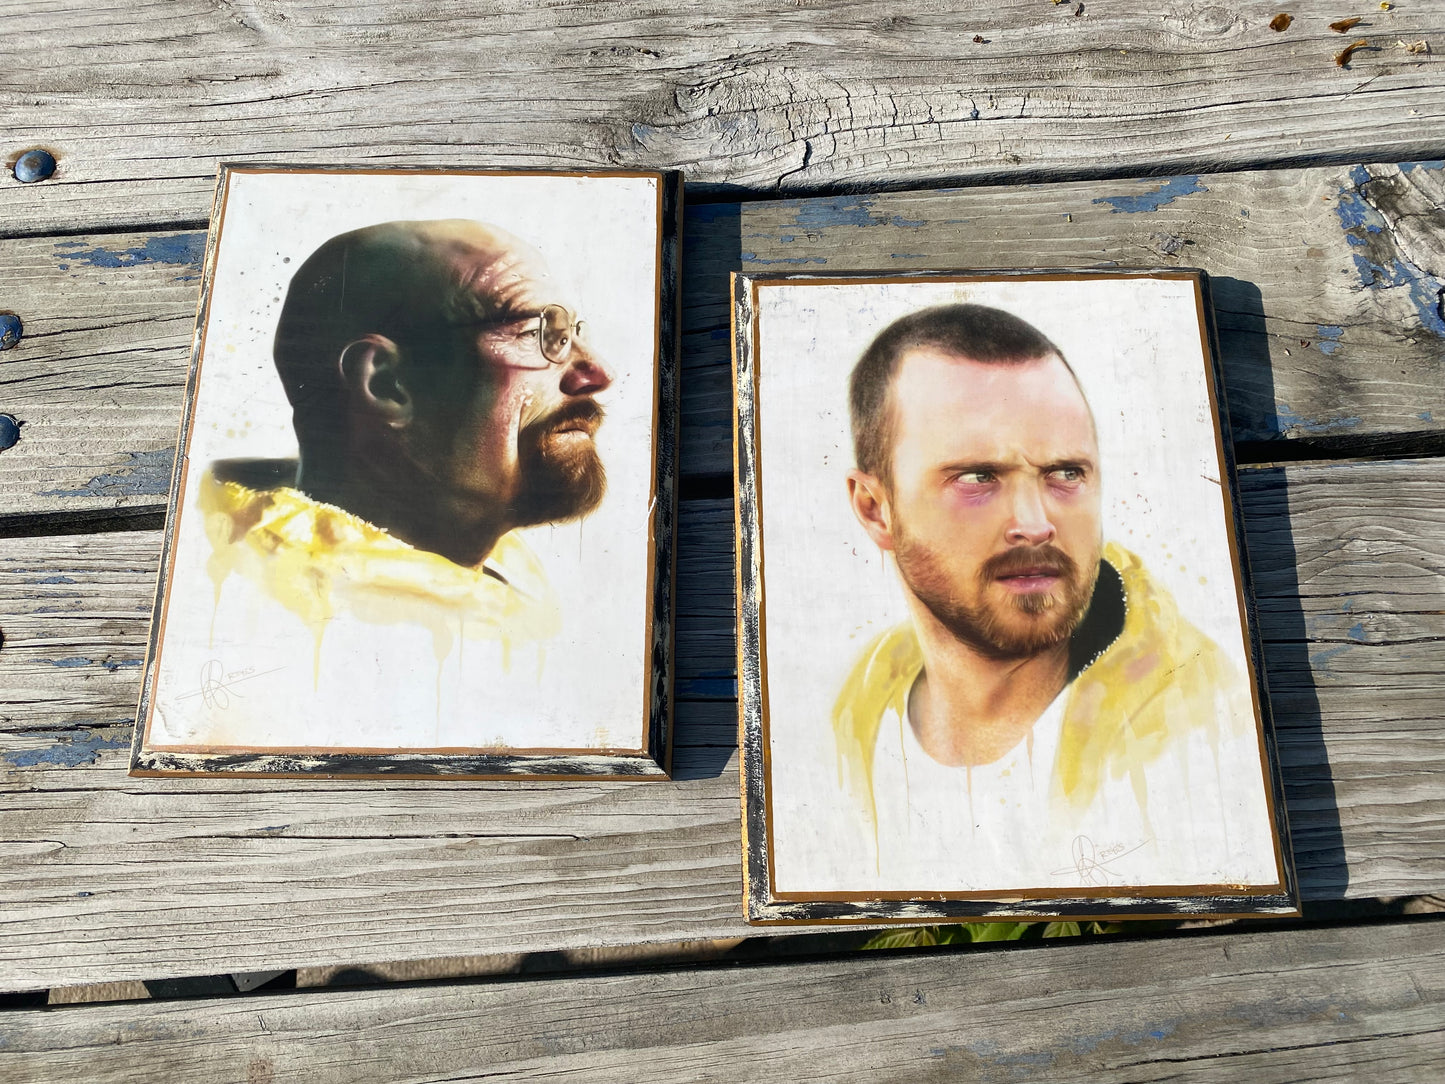 Breaking bad, handmade solid wood framed art plaque set of two 12 x 9”